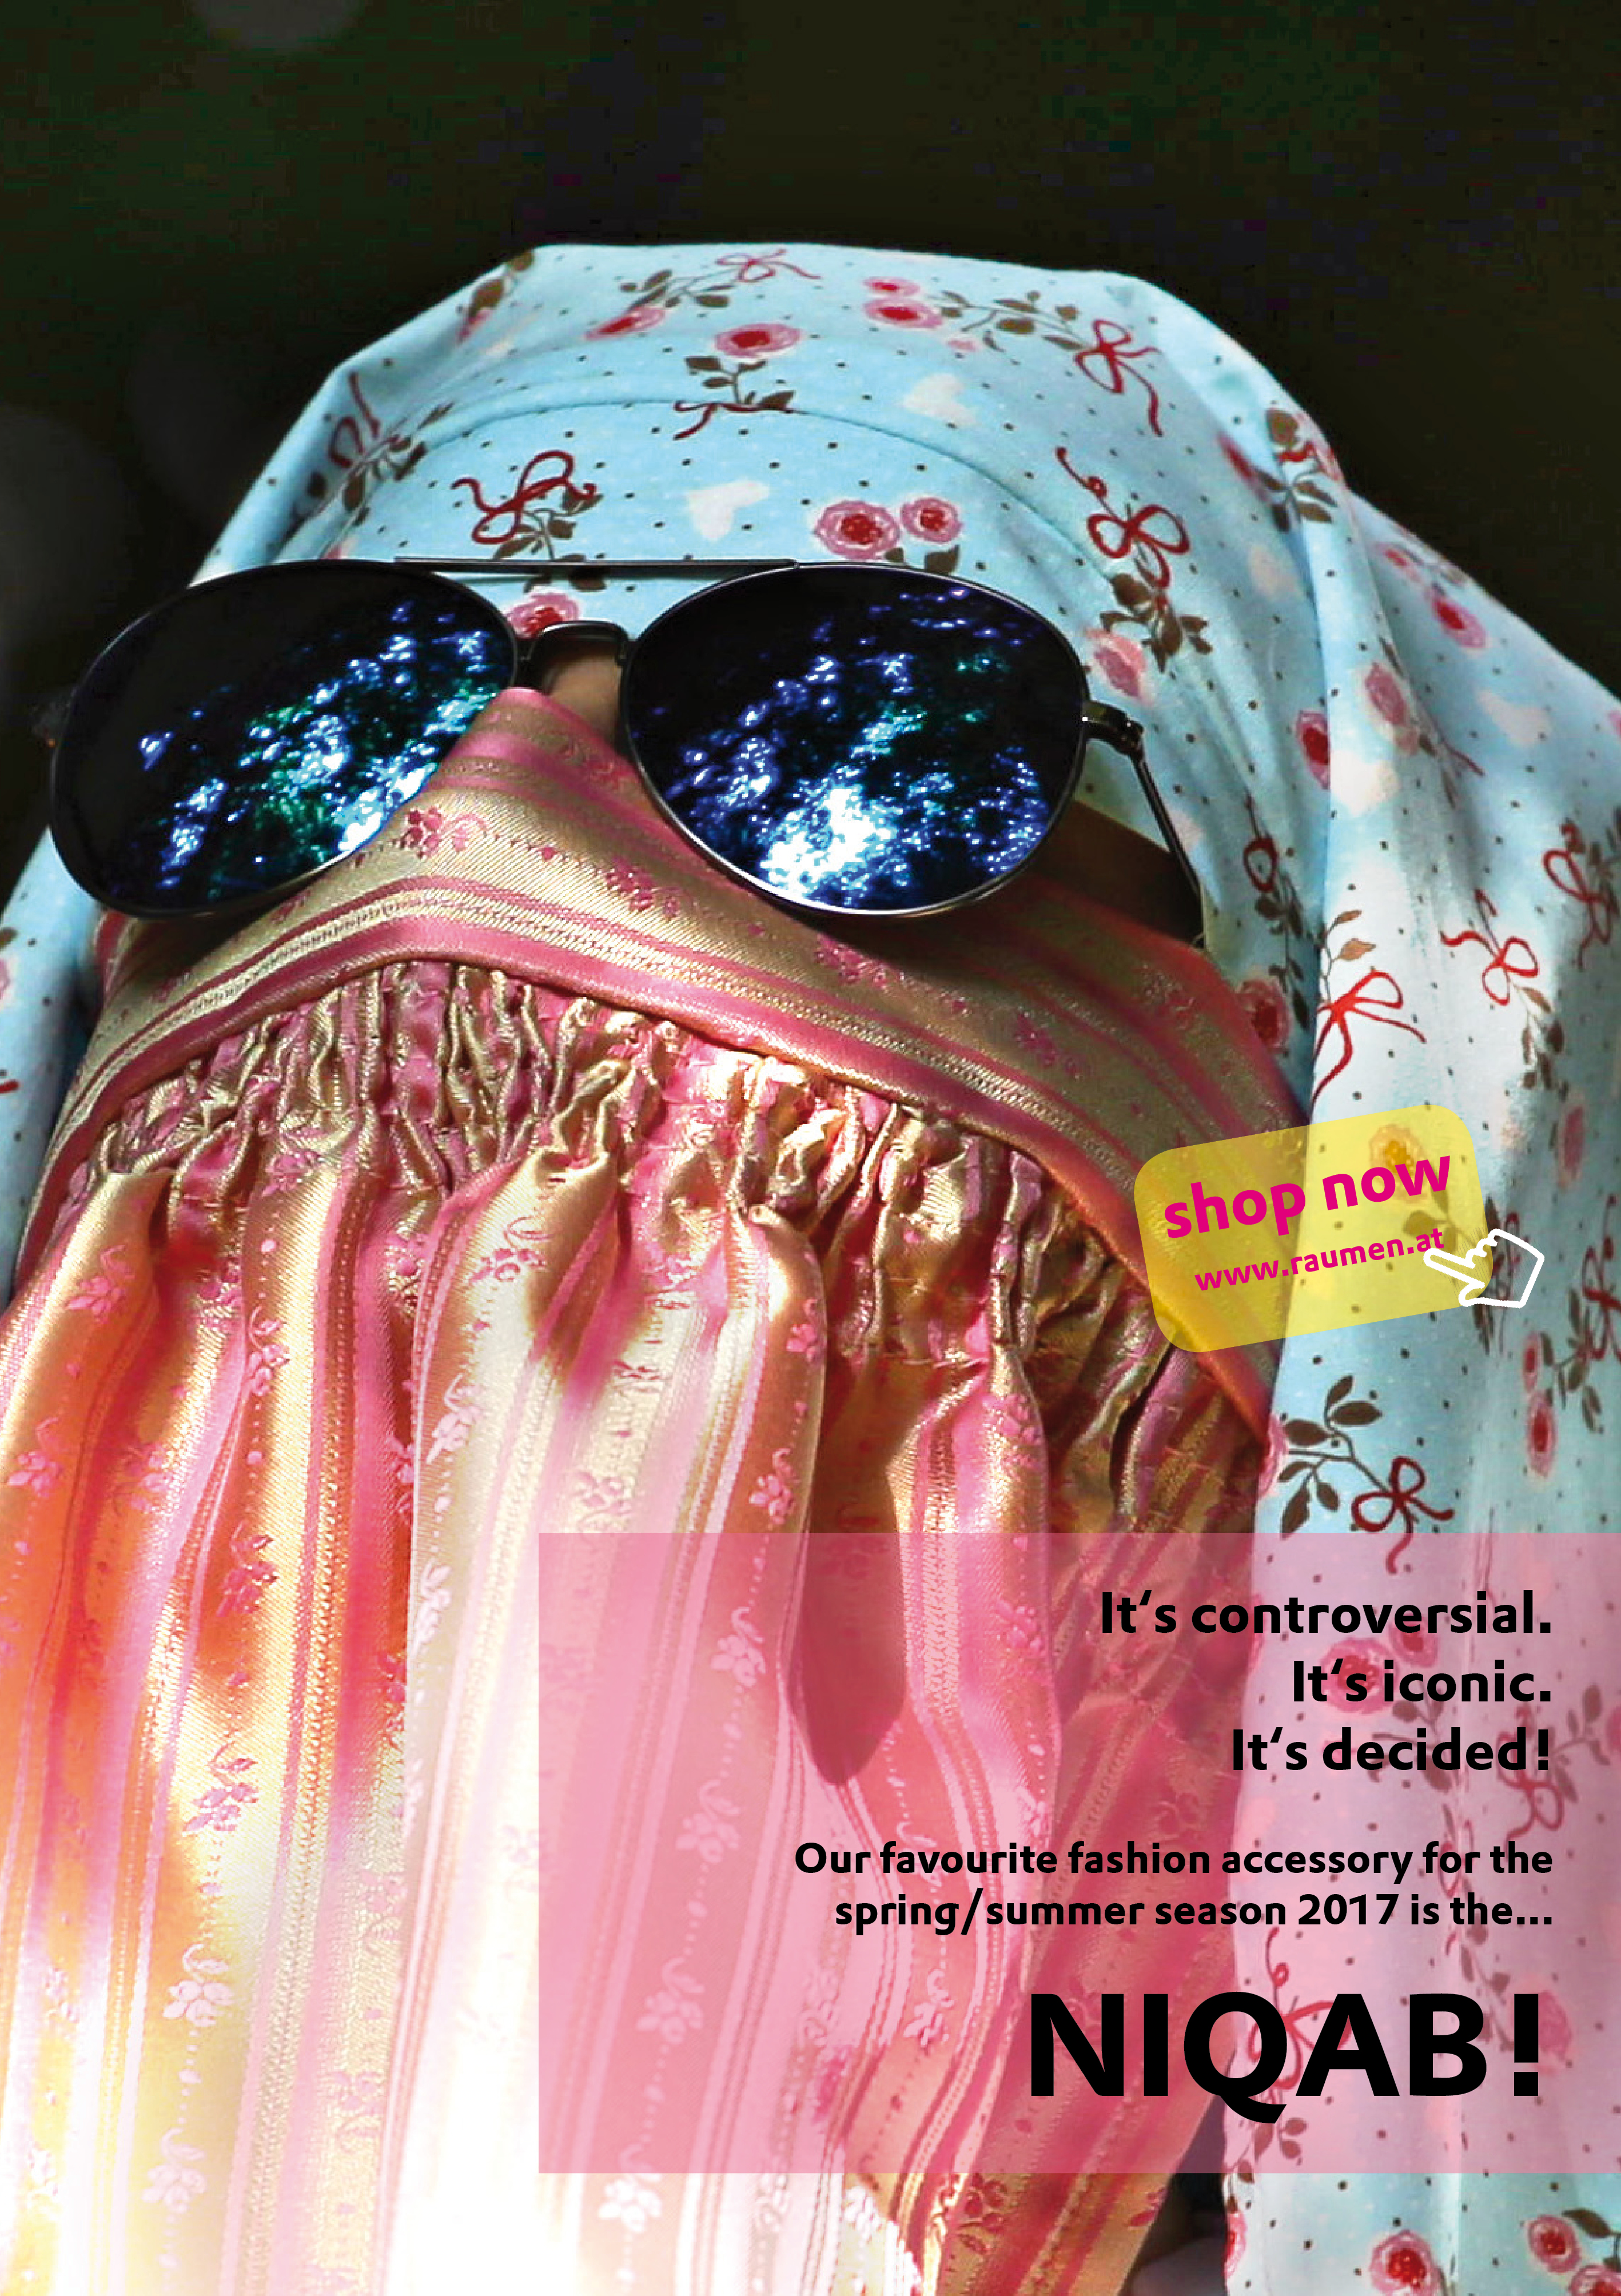 Close up of a person's head wearing a dirndl niqab and sunglasses